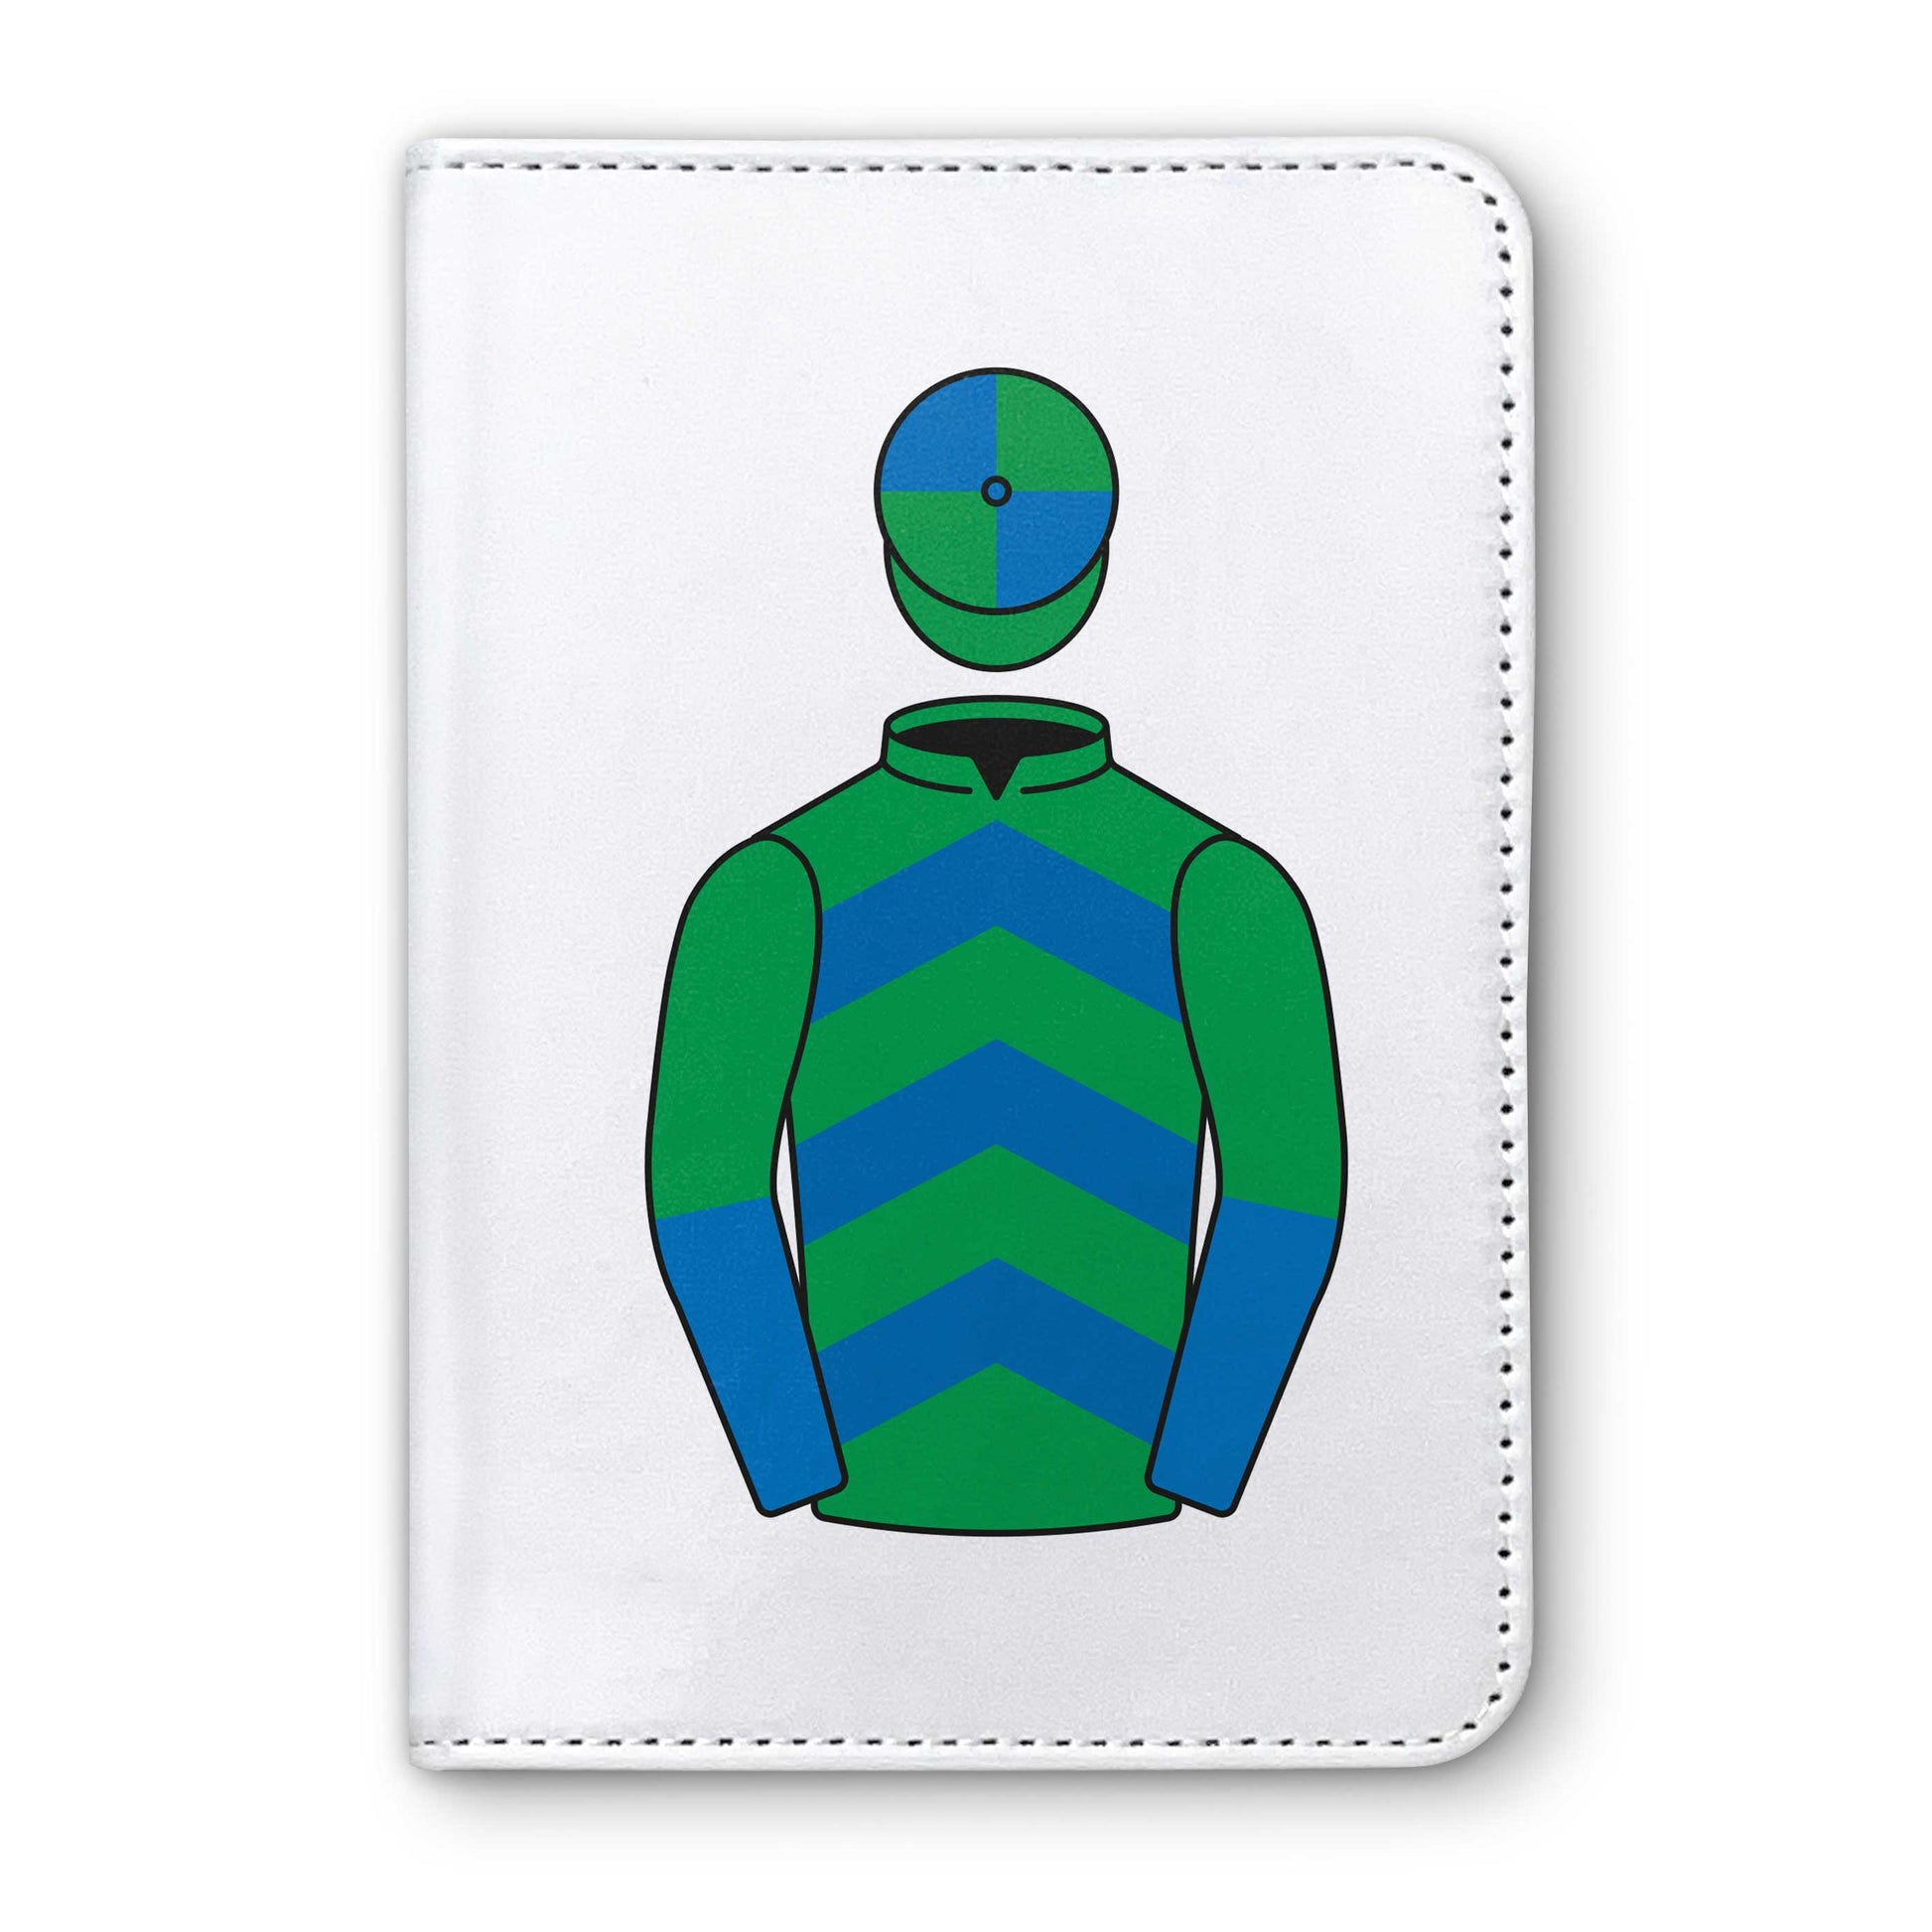 Mrs Alurie O Sullivan Horse Racing Passport Holder - Hacked Up Horse Racing Gifts